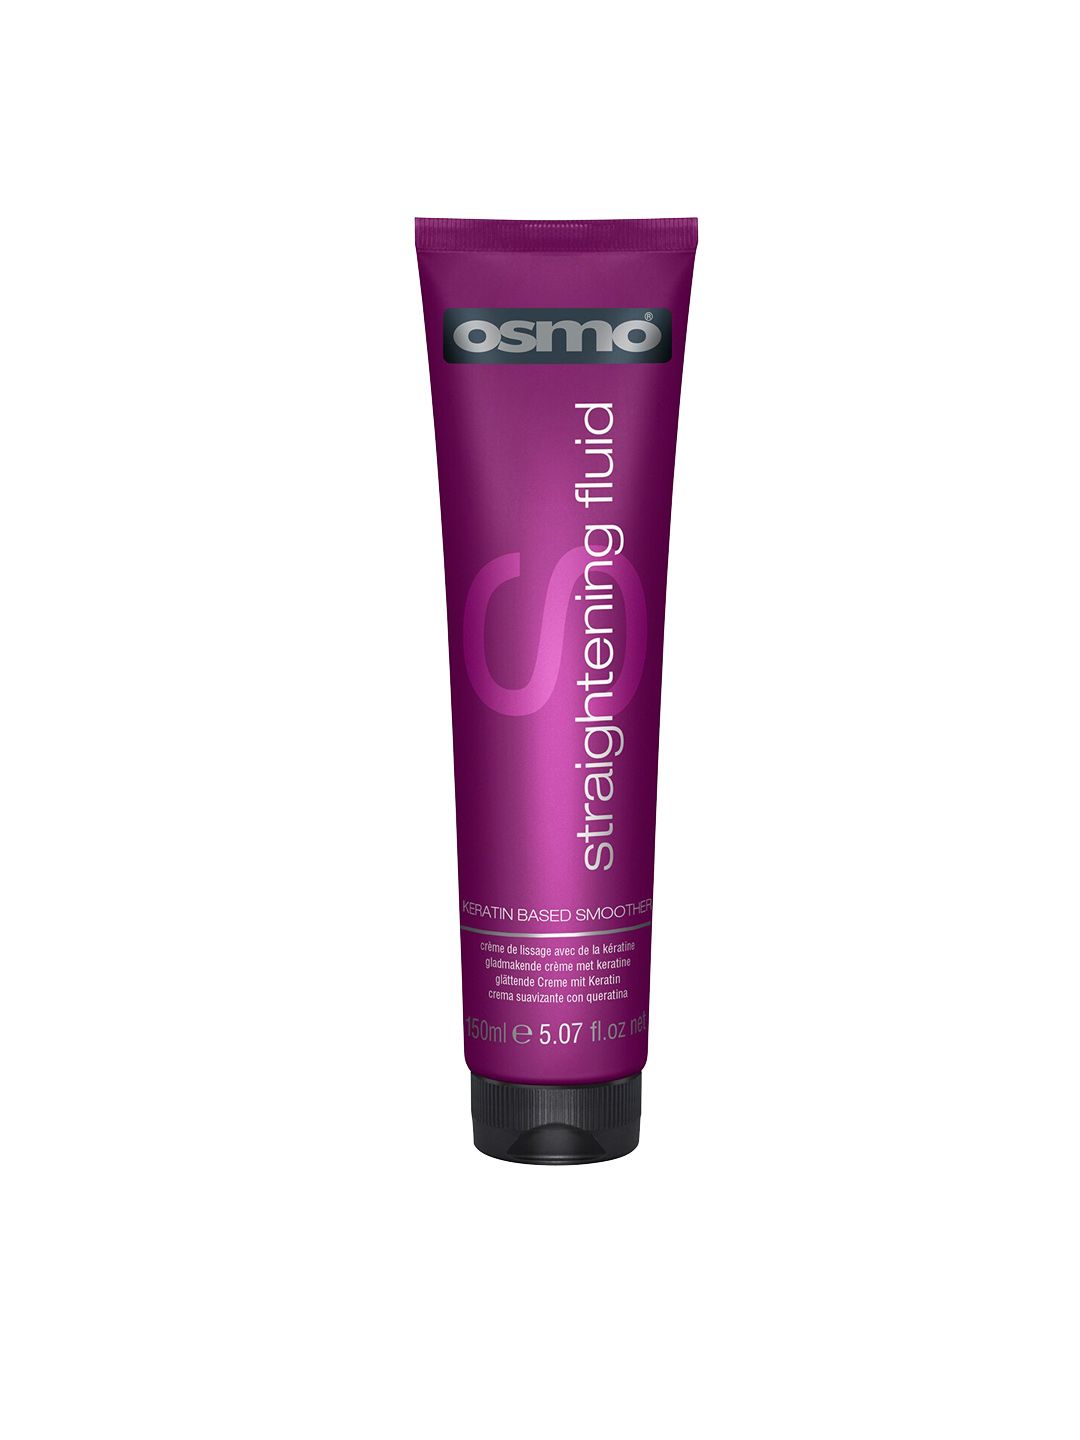 osmo Straightening Fluid - Keratin Based Smoother - 150ml Price in India